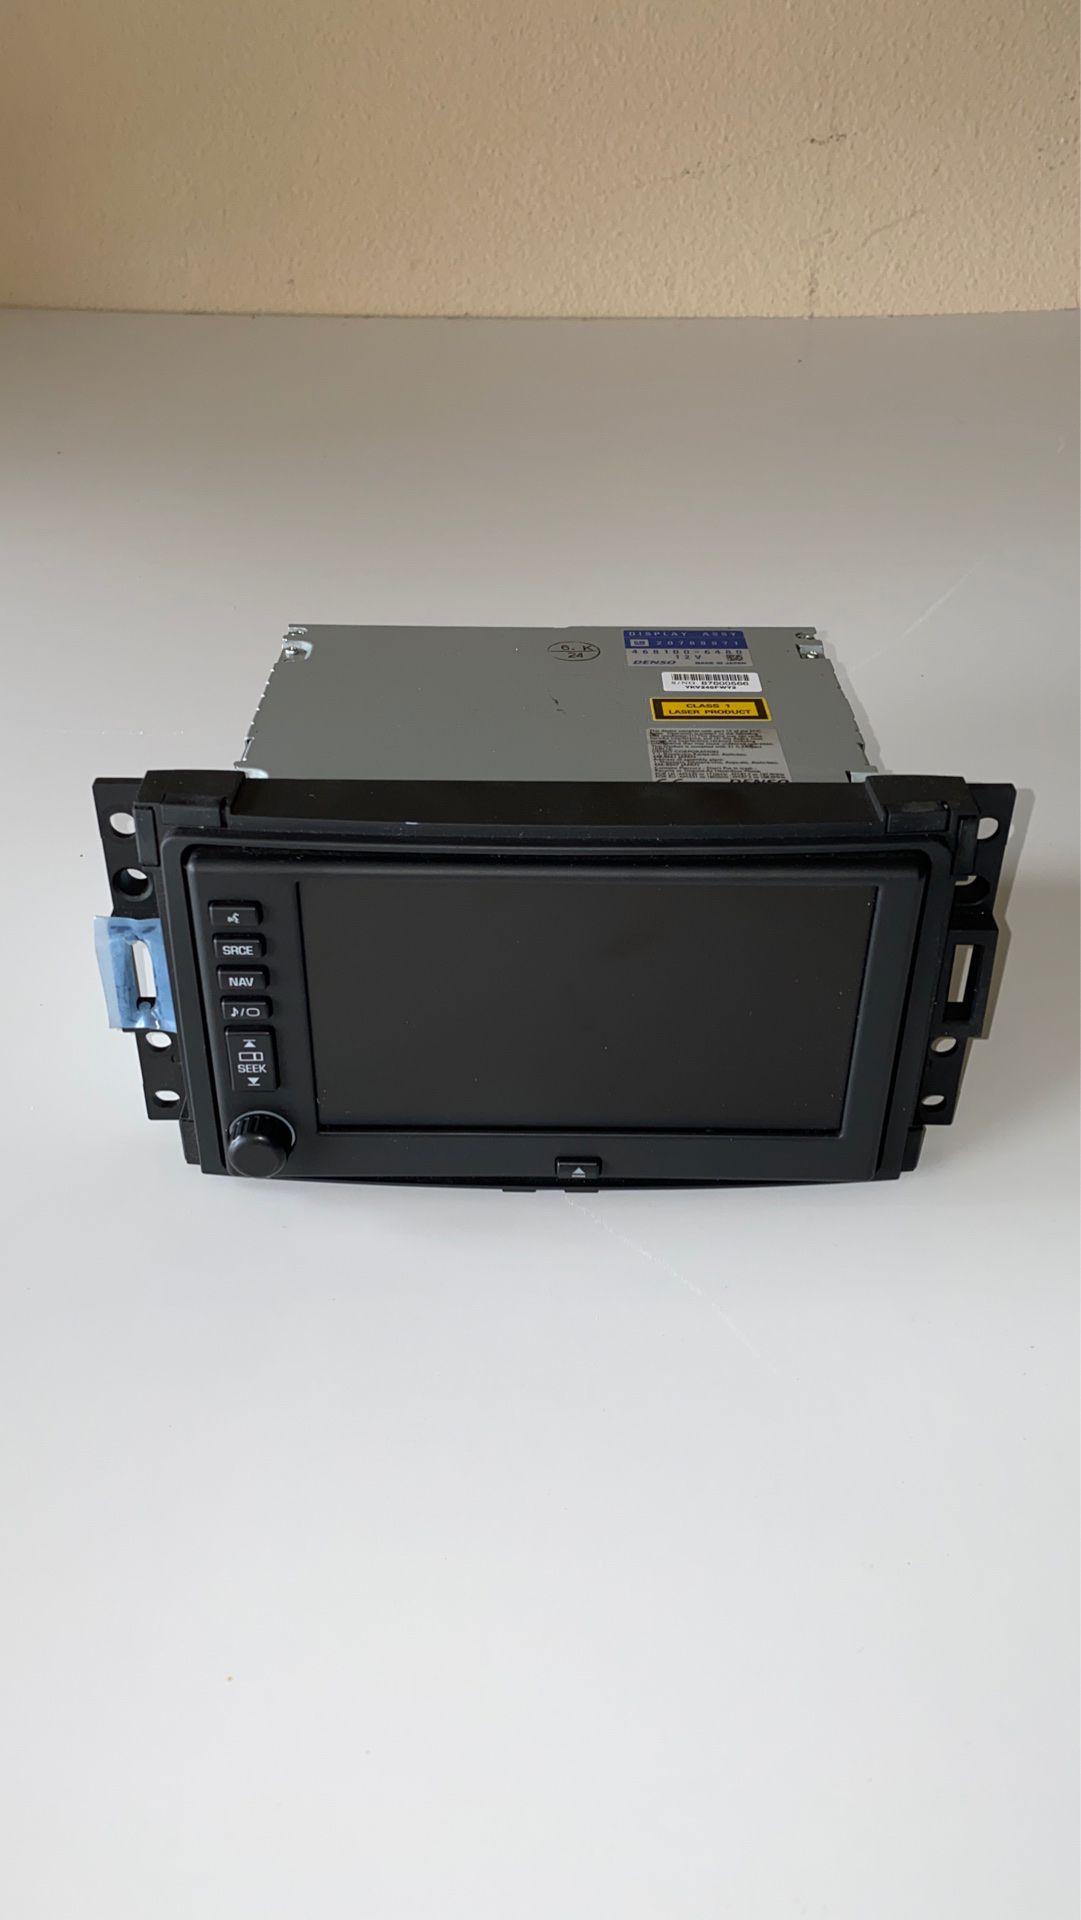 6.5” Touch Screen Chevrolet Factory Receiver with CD/Nav